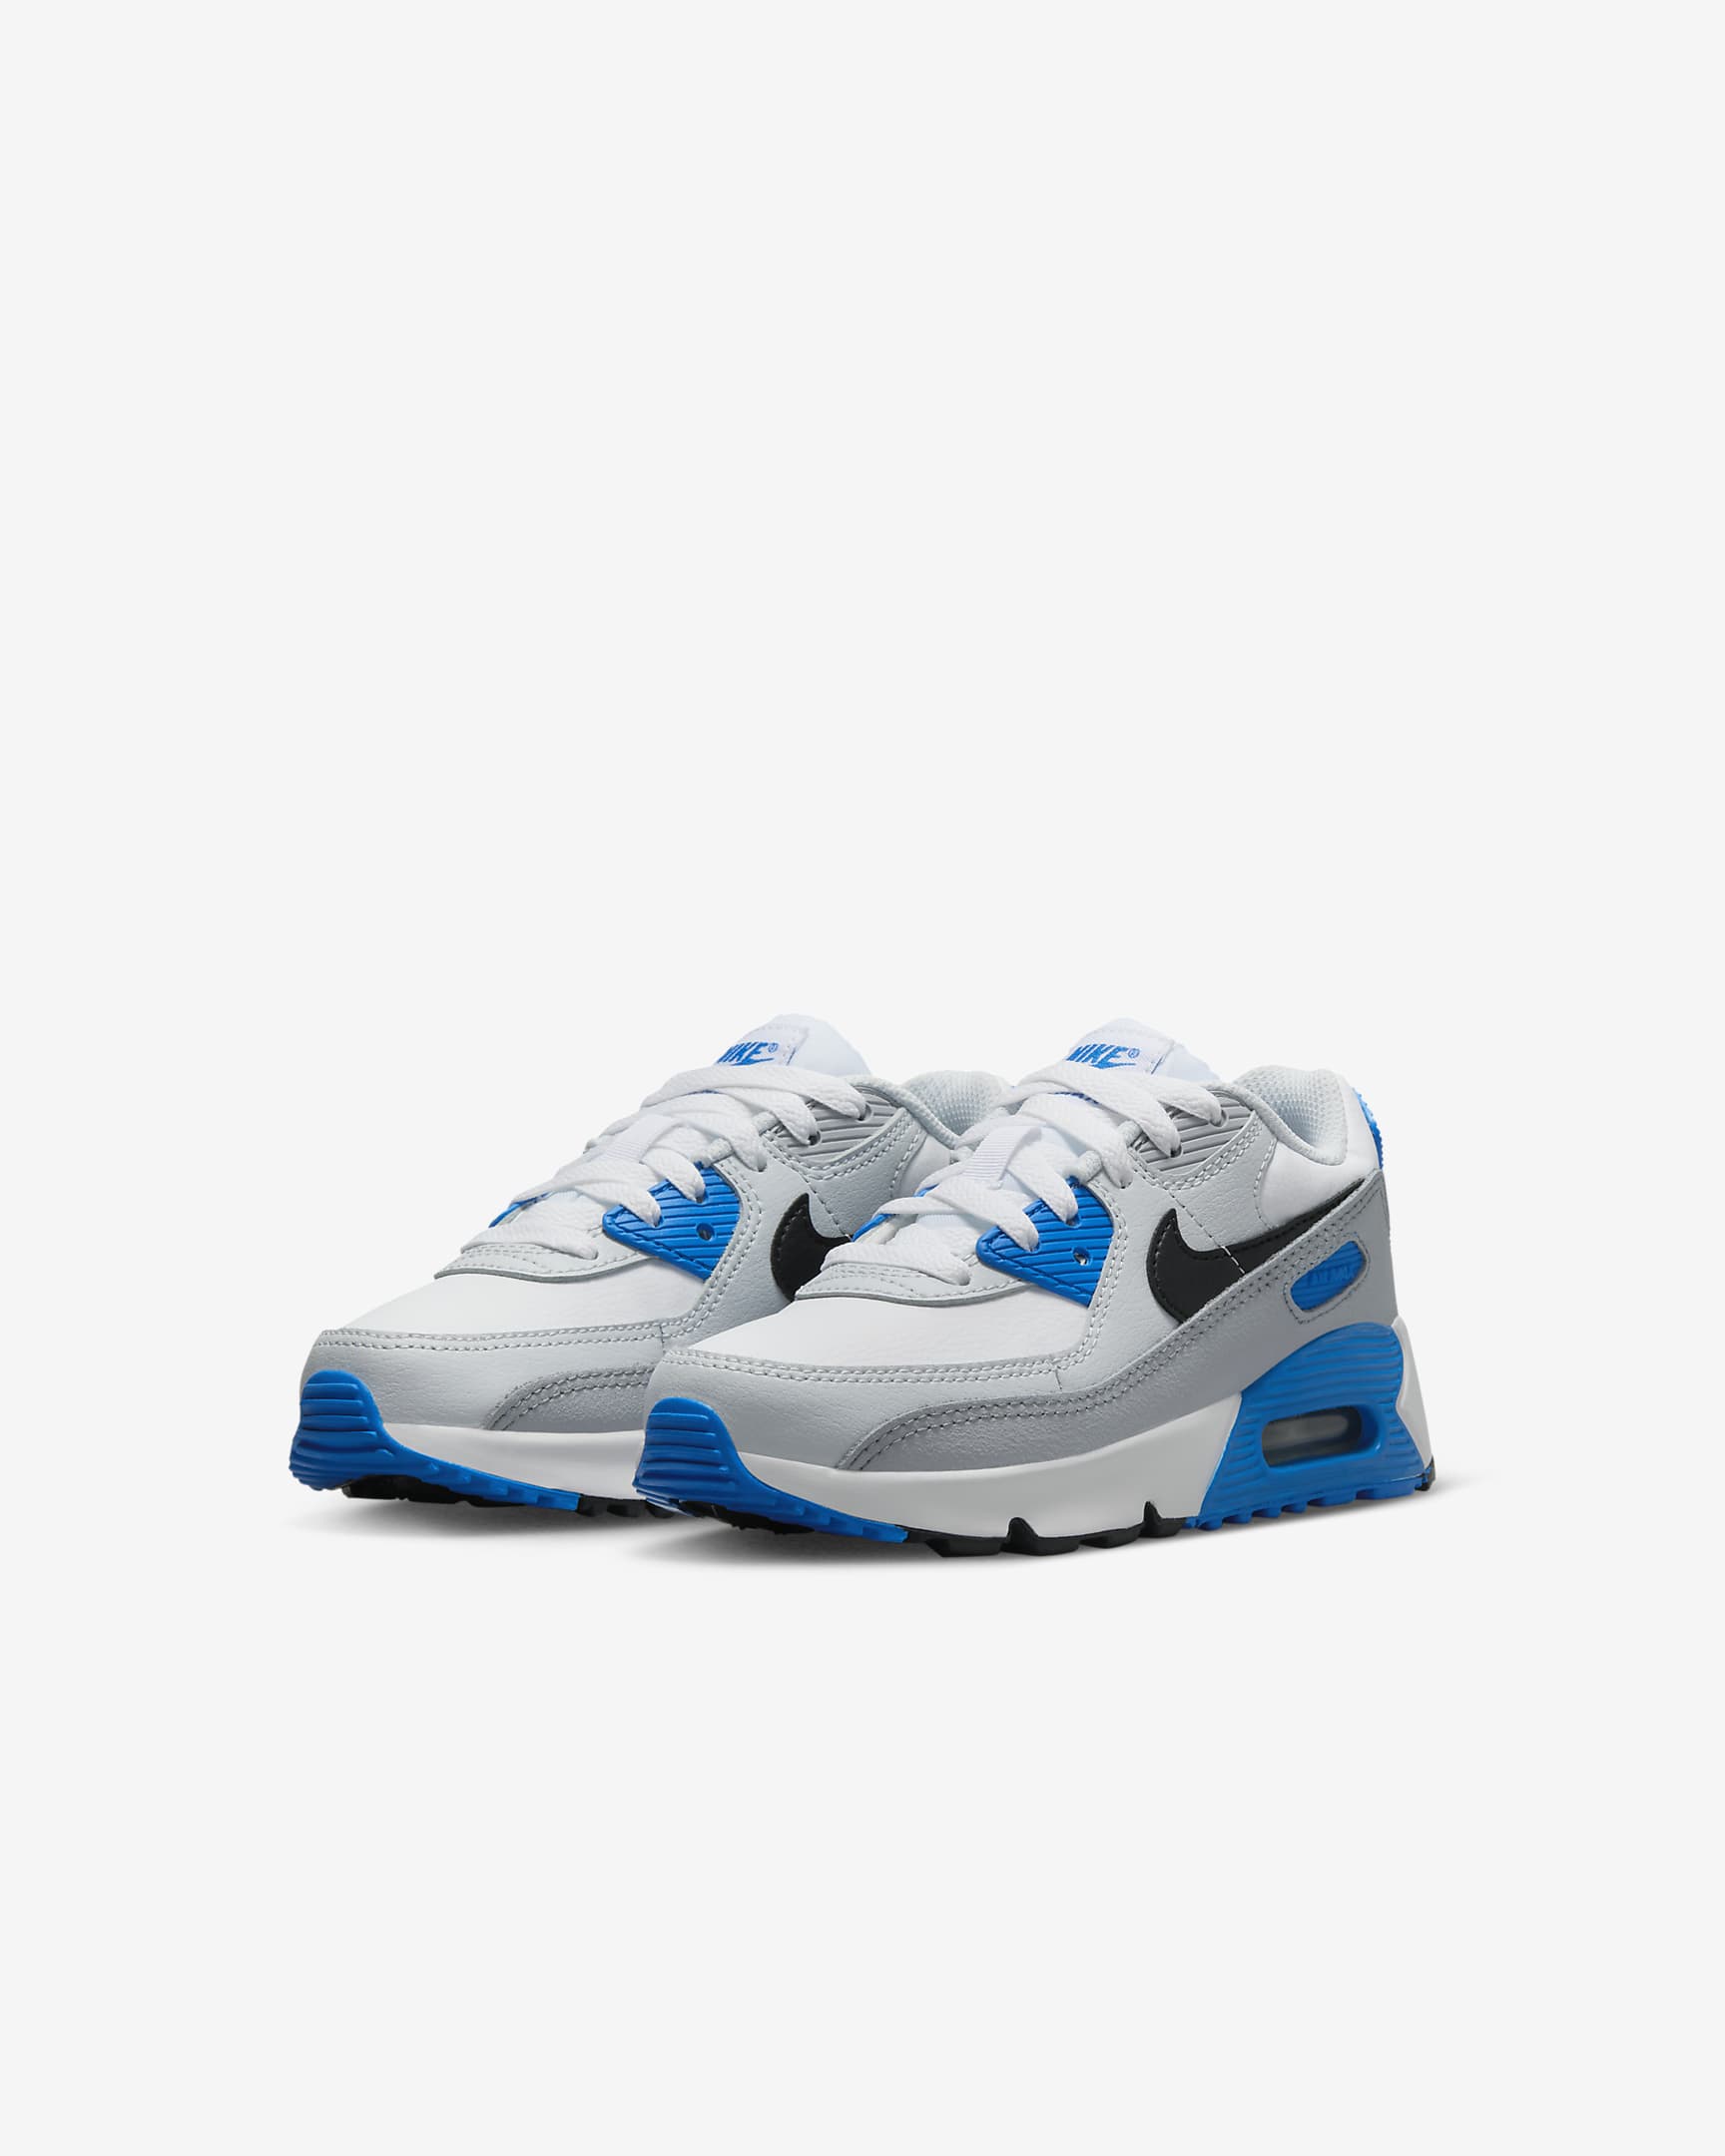 Nike Air Max 90 LTR Younger Kids' Shoes - White/Photo Blue/Pure Platinum/Black